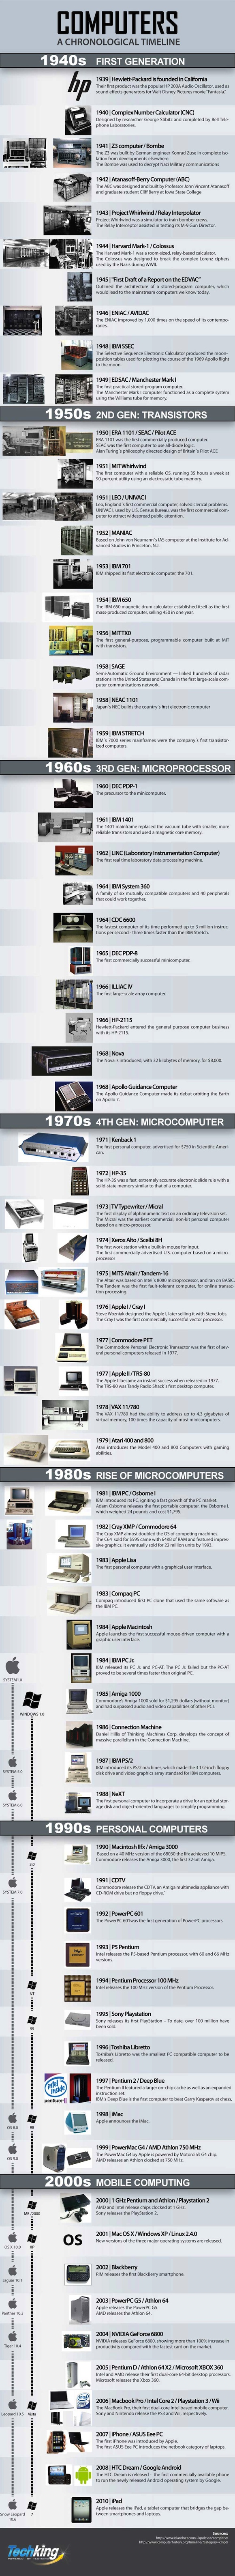 A History Of Computers From 1939 to 2010